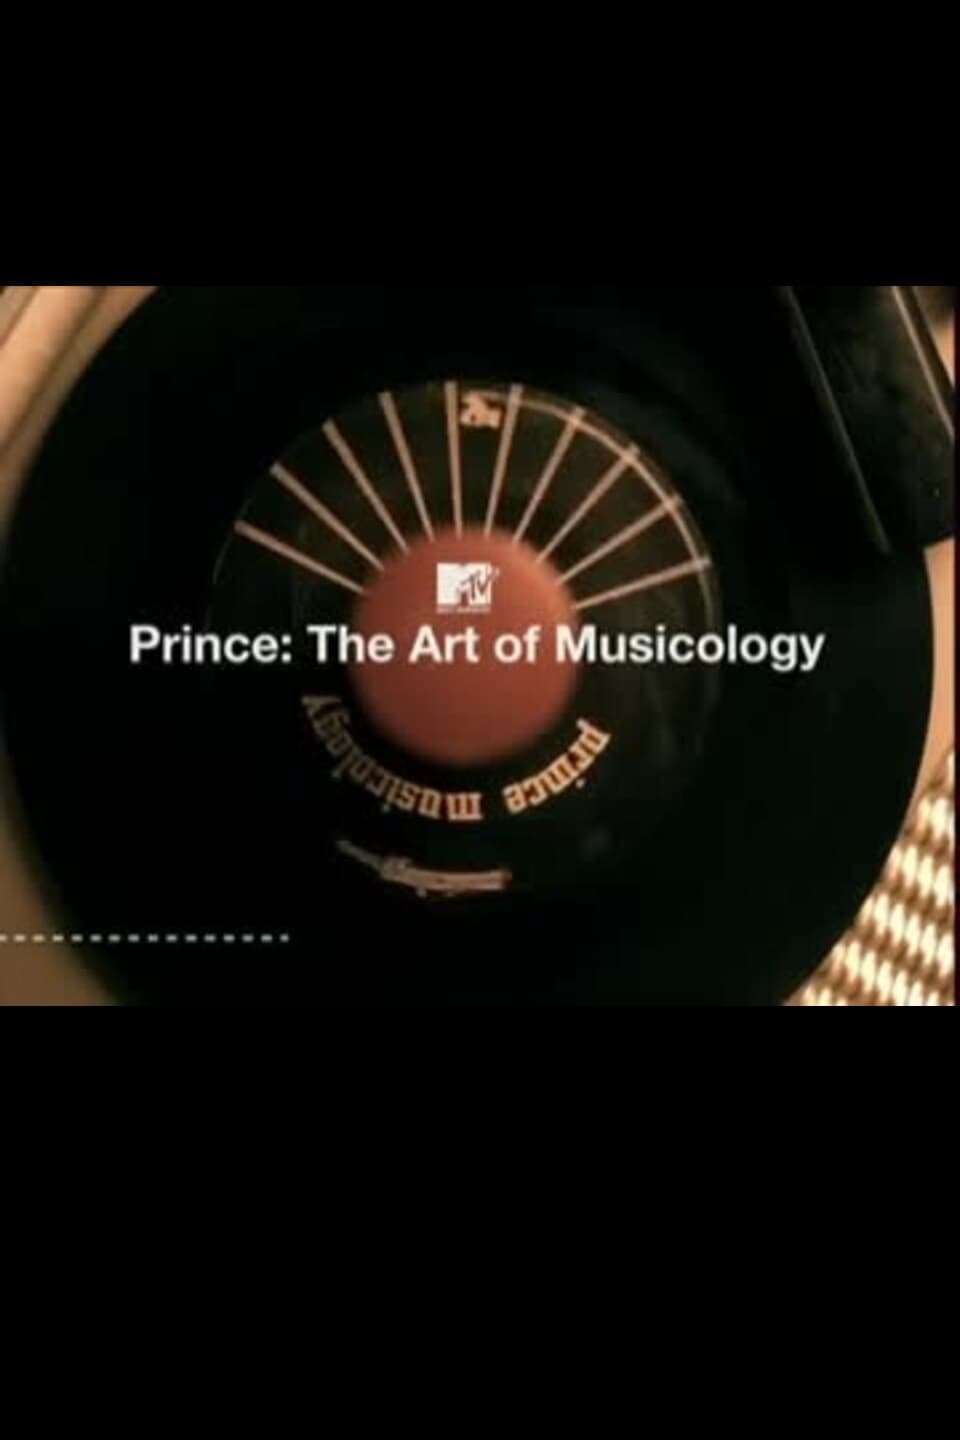 Prince: The Art of Musicology